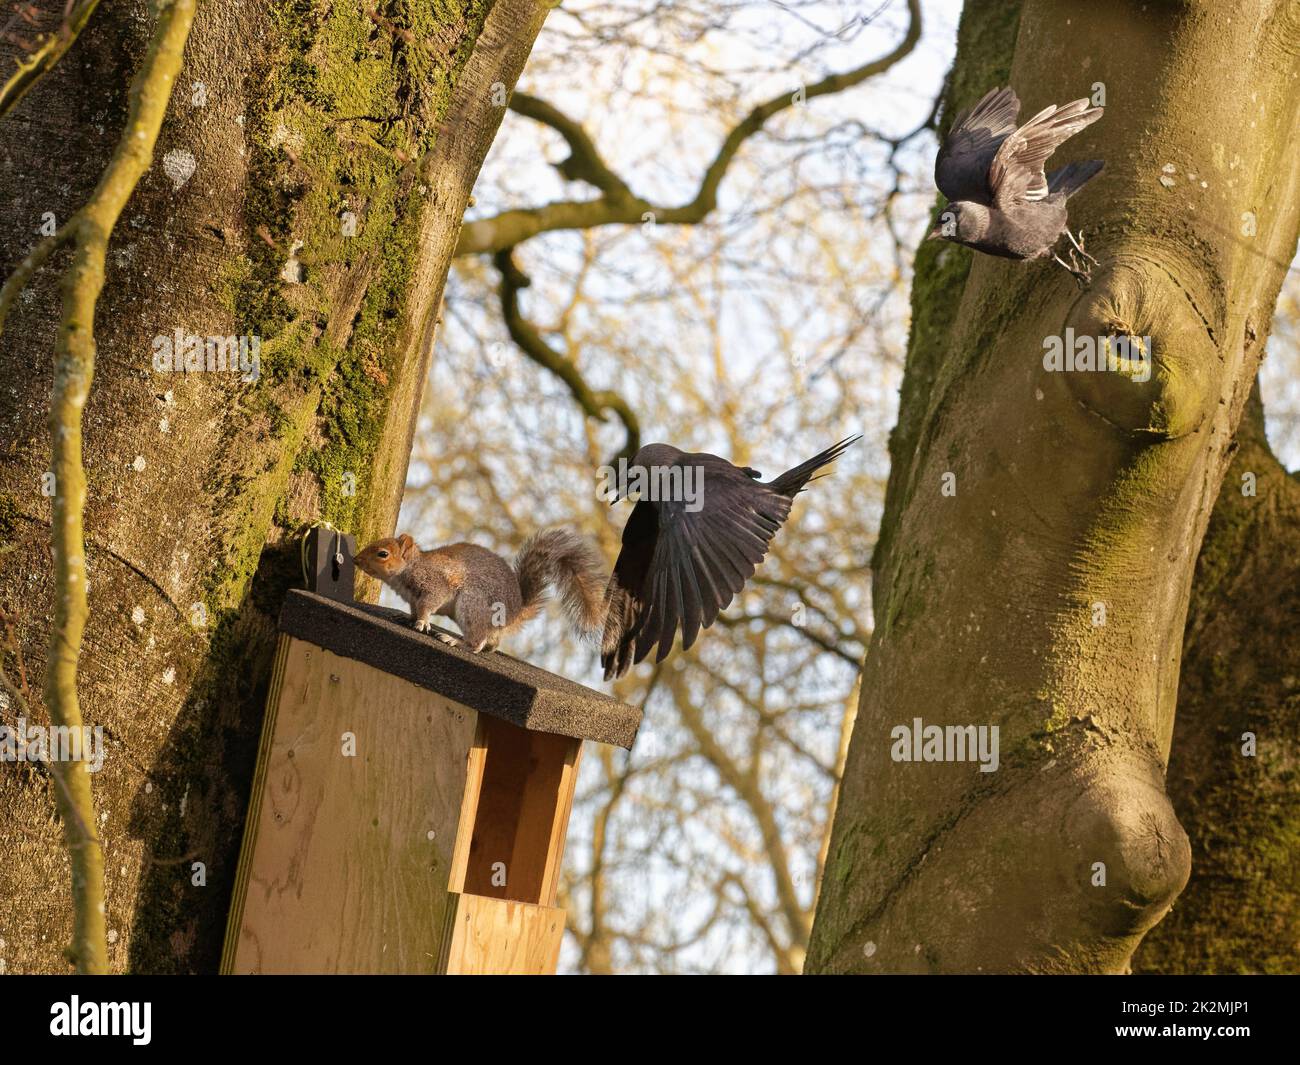 Jackdaw (Corvus monedula) pair chasing a Grey squirrel (Sciurus carolinensis) as it emerges from a nest box the birds wants to nest in, Wiltshire, UK Stock Photo